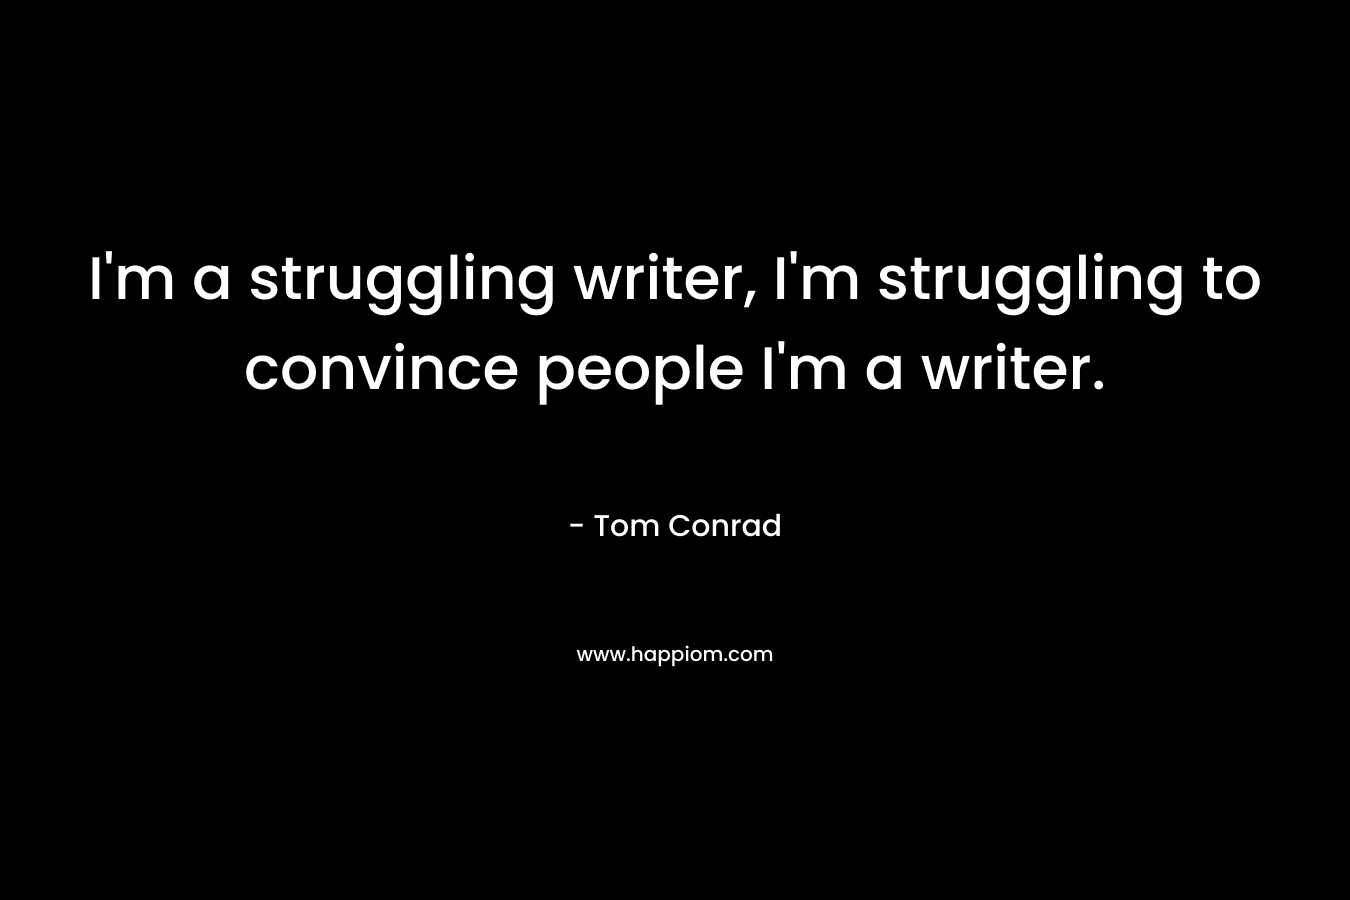 I'm a struggling writer, I'm struggling to convince people I'm a writer.